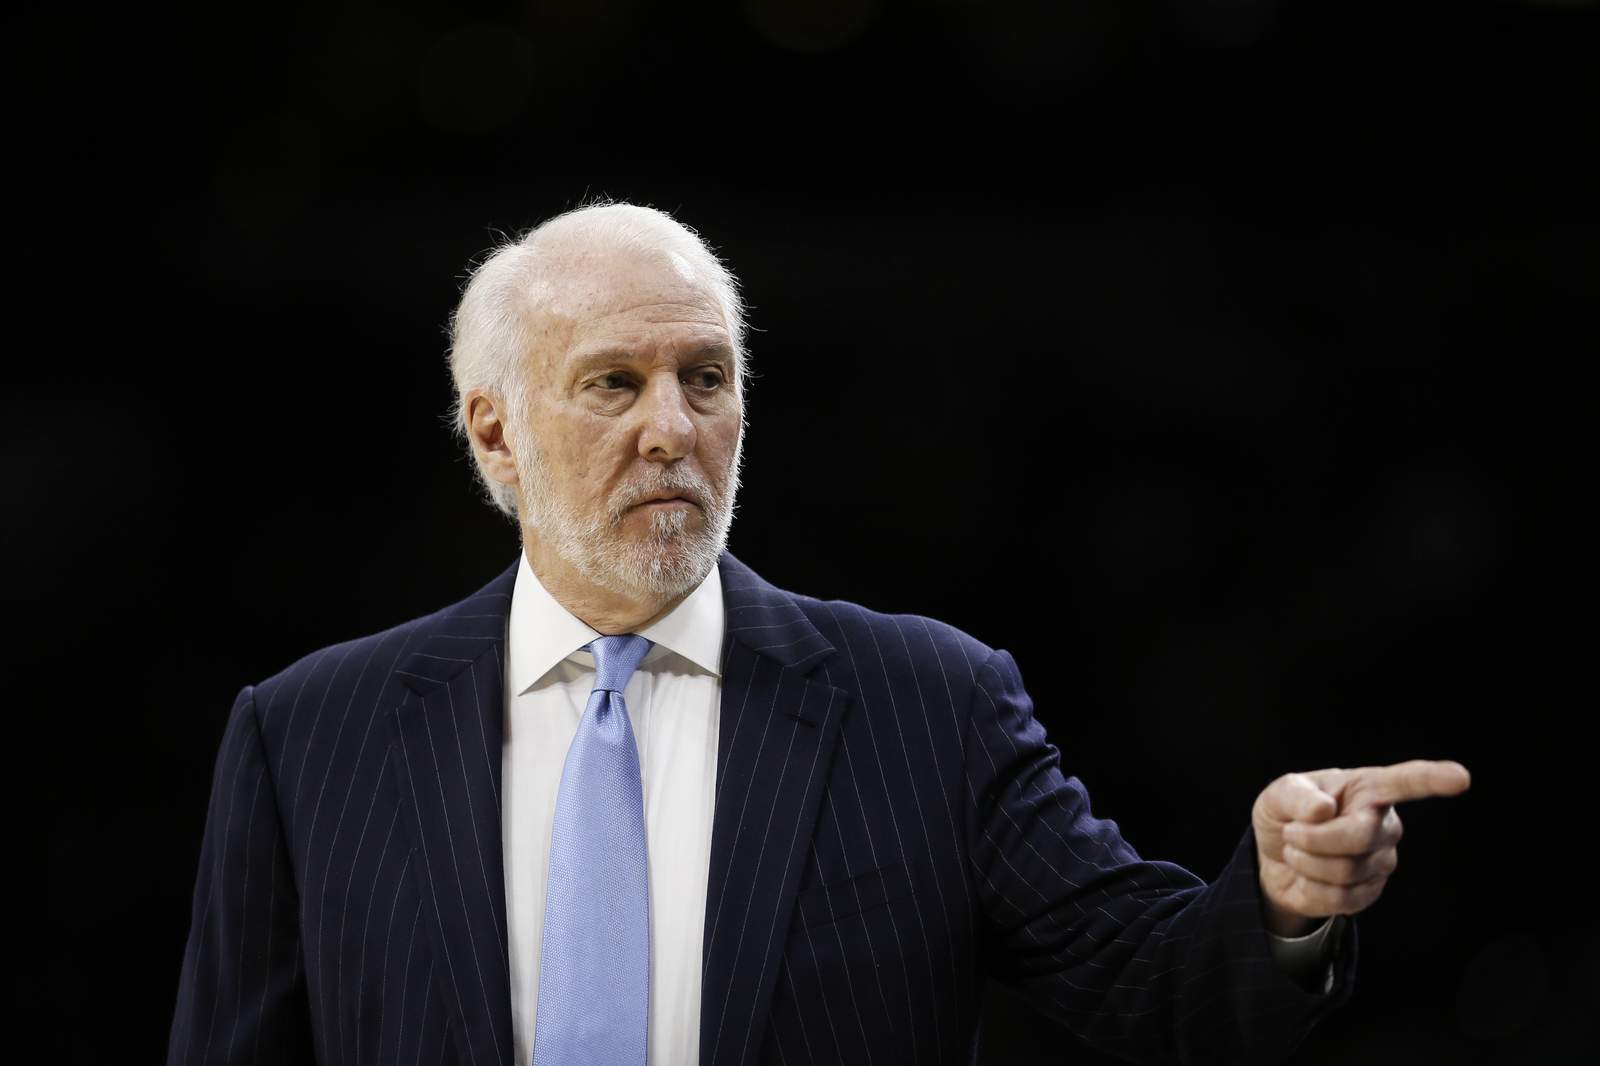 Gregg Popovich takes aim at Jerry Jones, NFL commissioner, President Trump in interview with New York Times